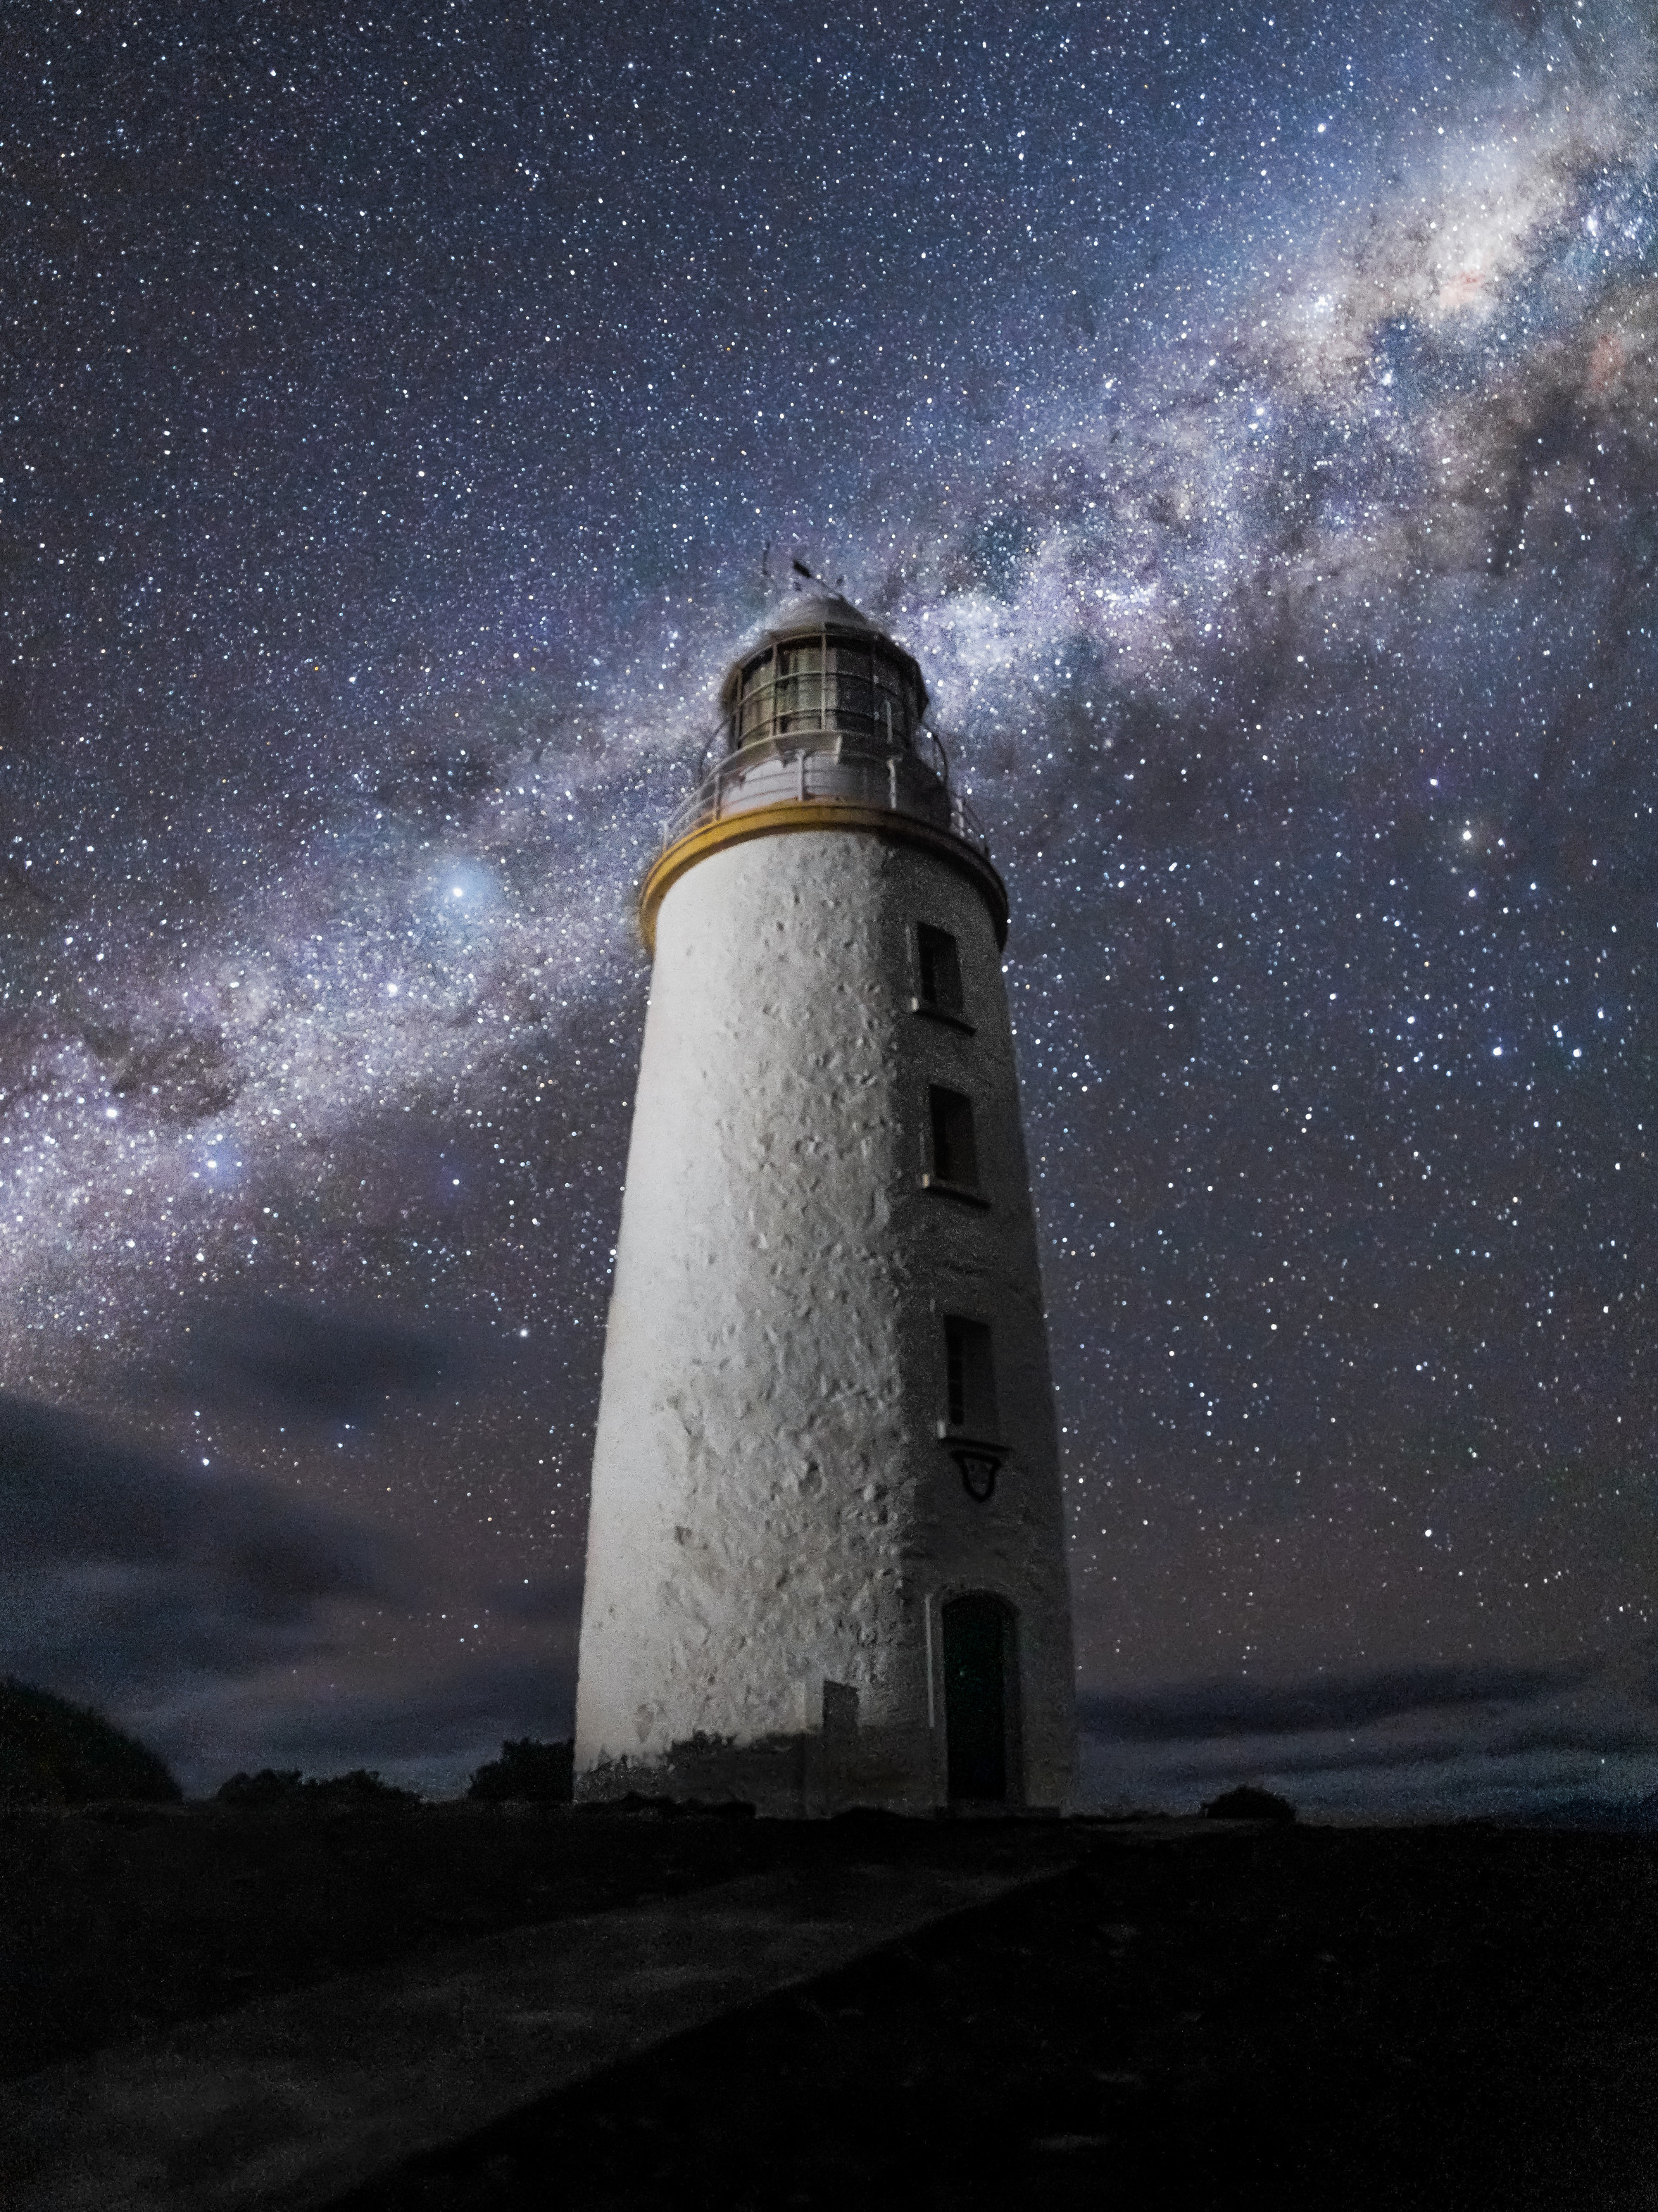 Stunning image of the Cape Bruny Lighthouse under the stars.